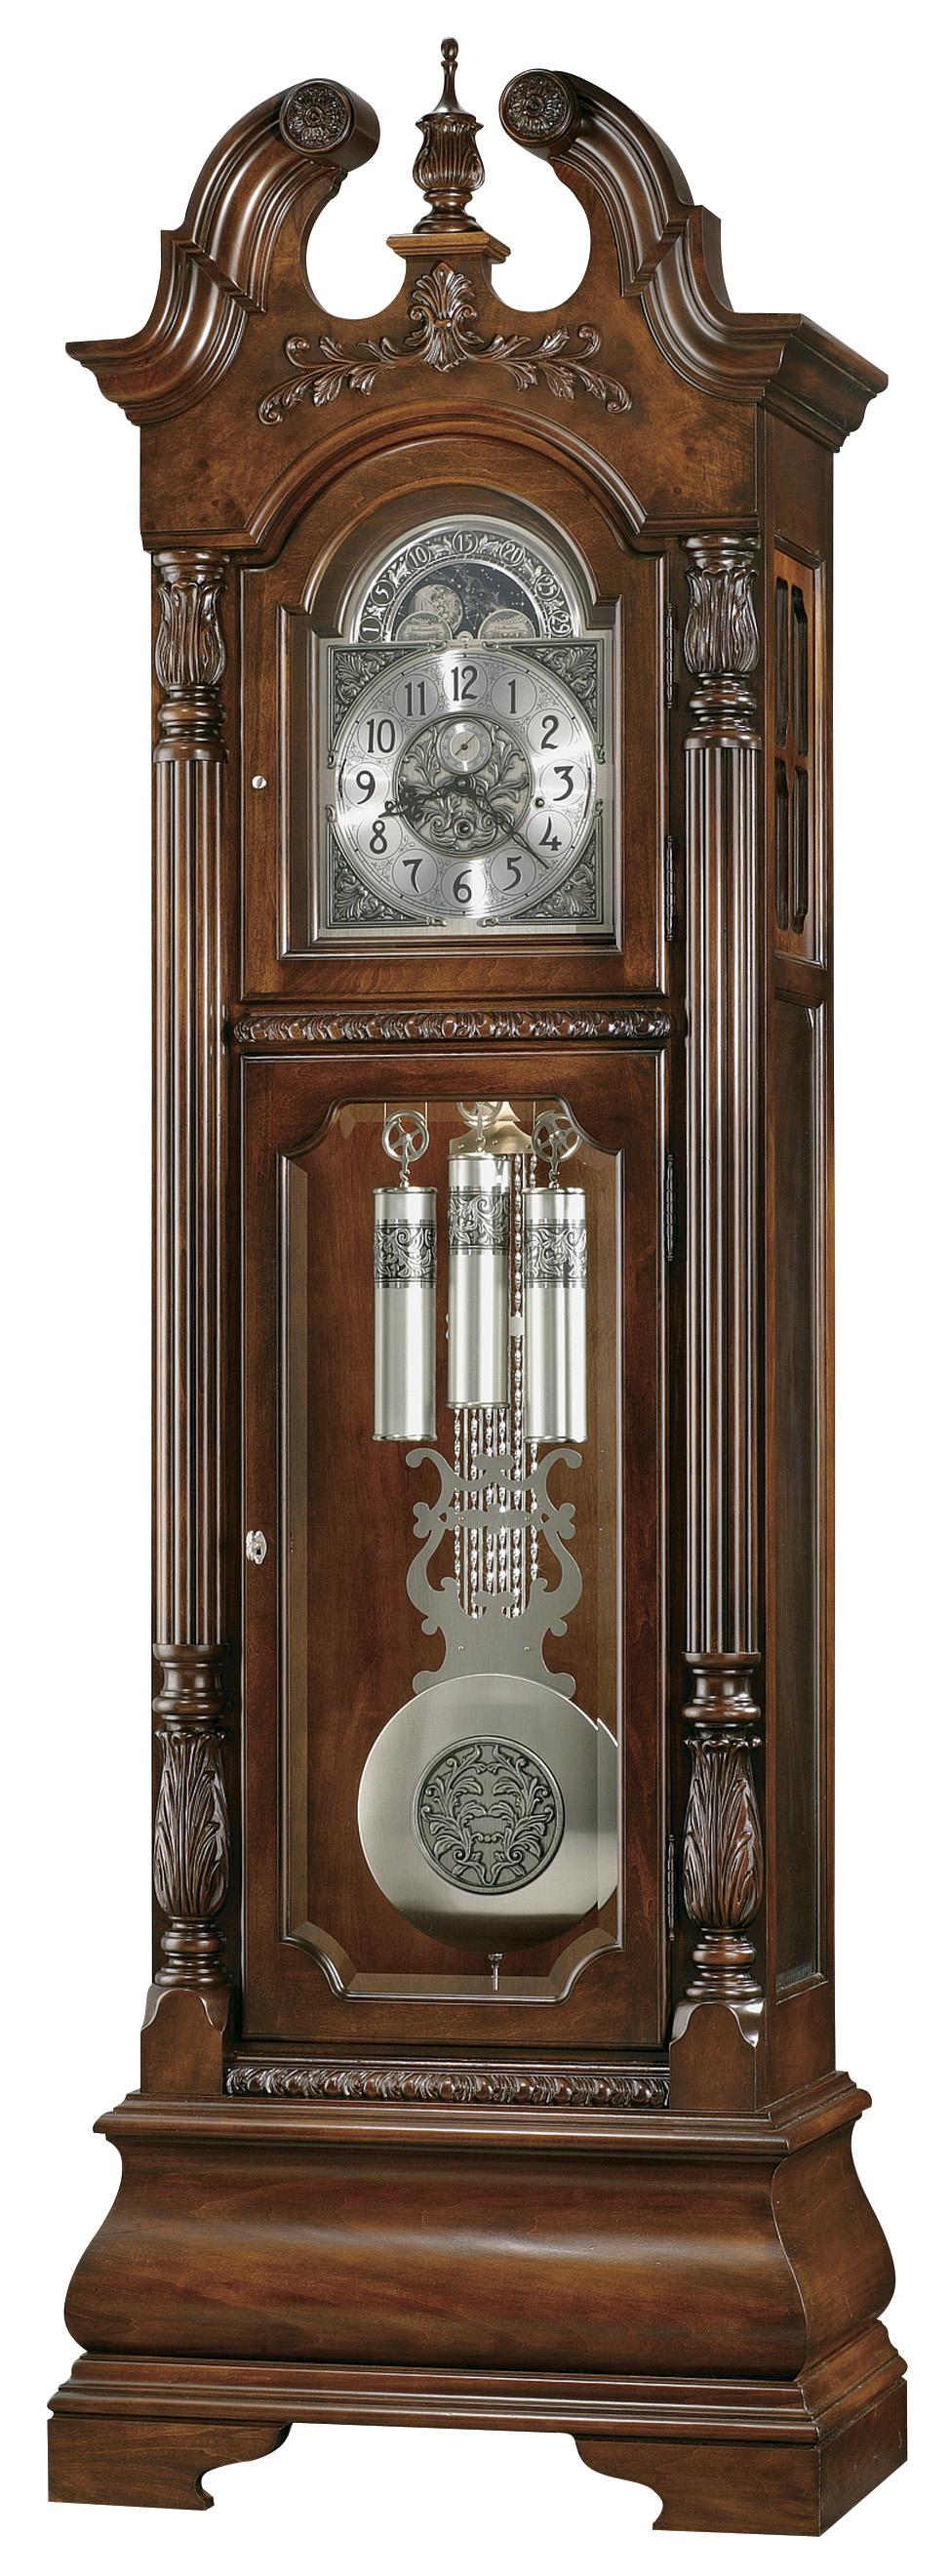 Stratford Grandfather Clock with Decorative Vine and Shell Overlay